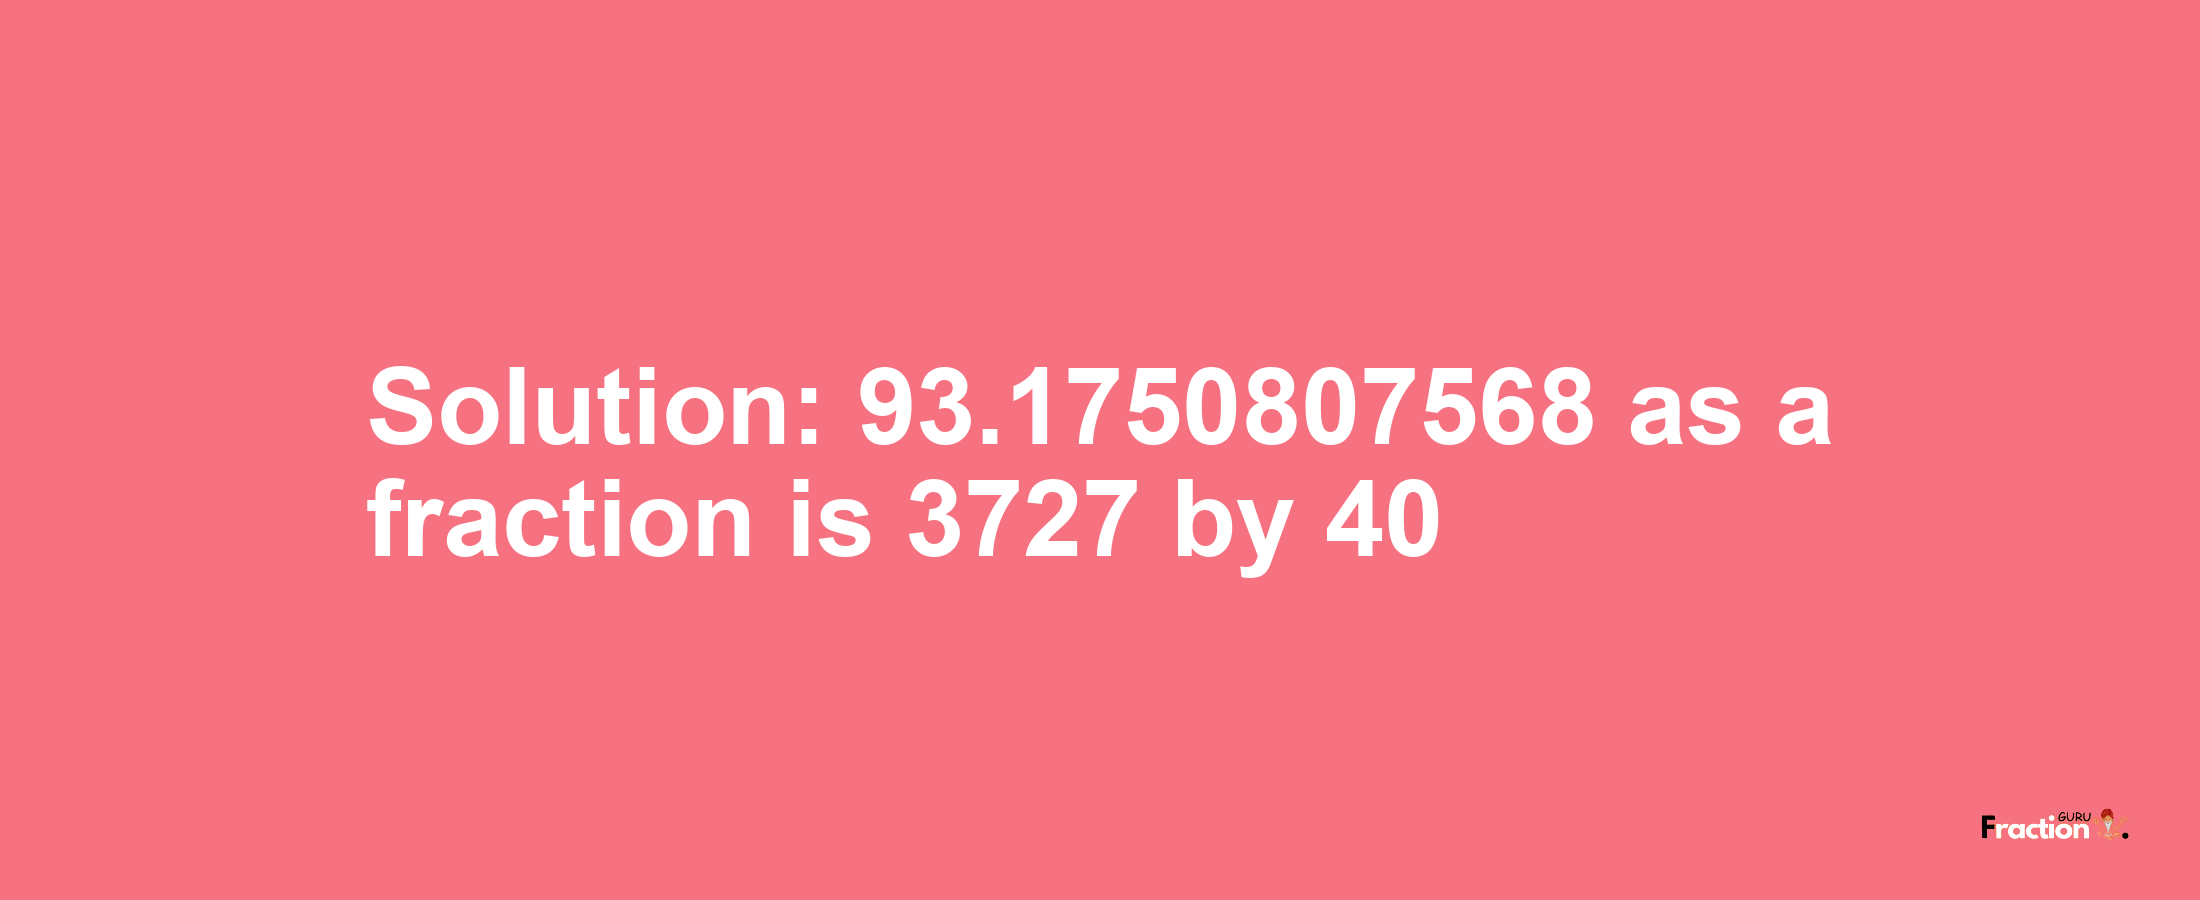 Solution:93.1750807568 as a fraction is 3727/40